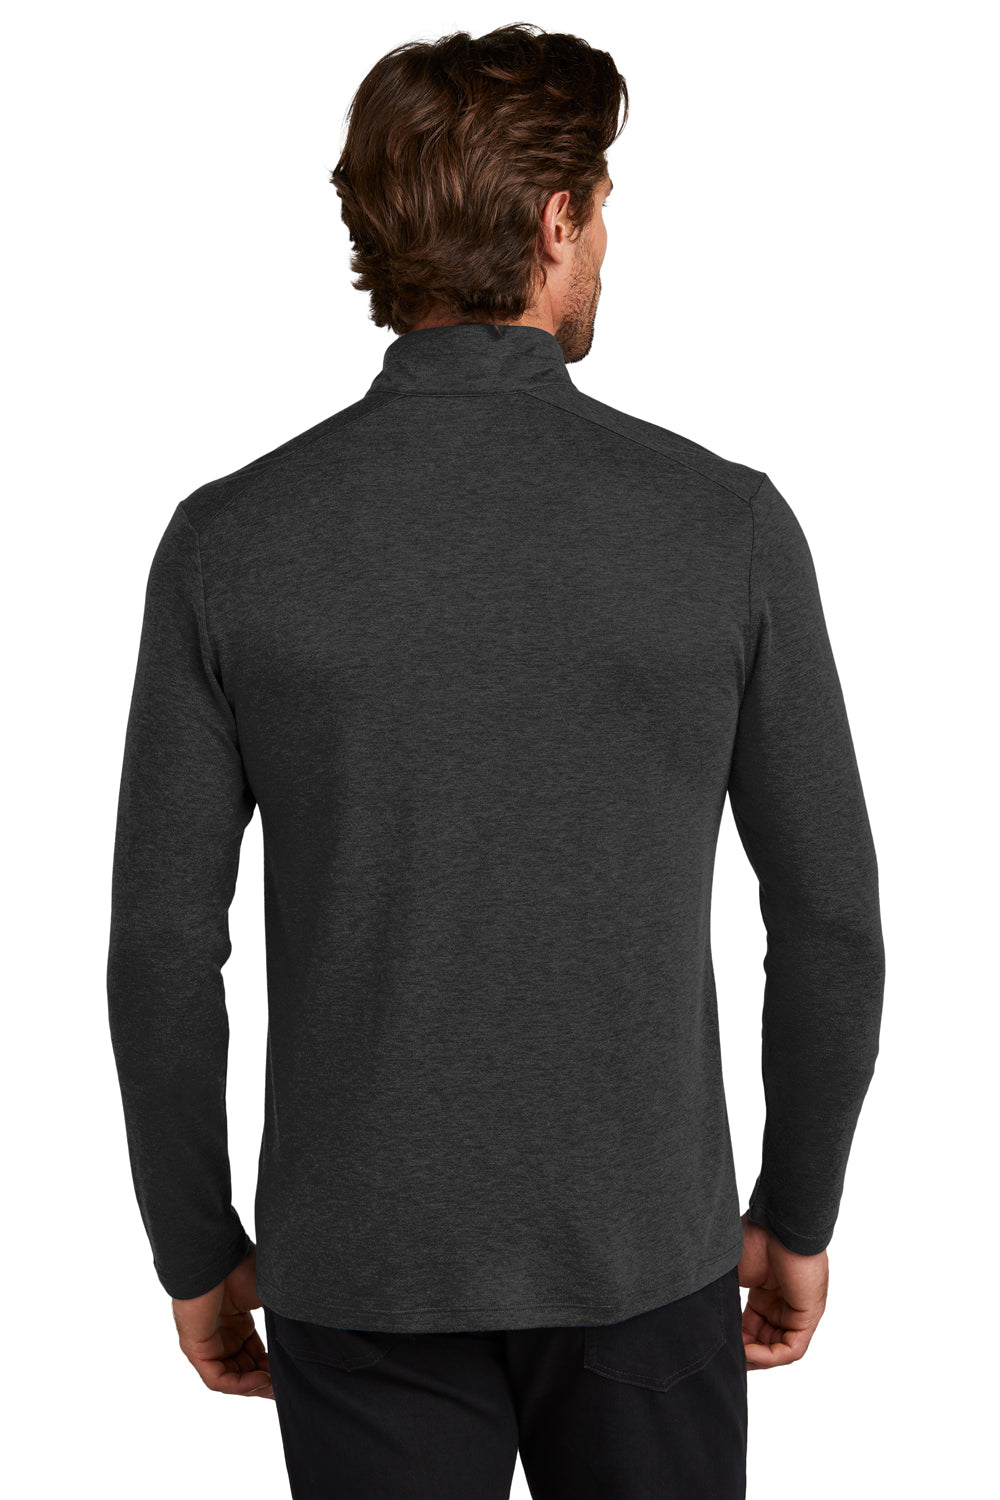 Ogio Mens Command 1/4 Snap Sweater Blacktop Back